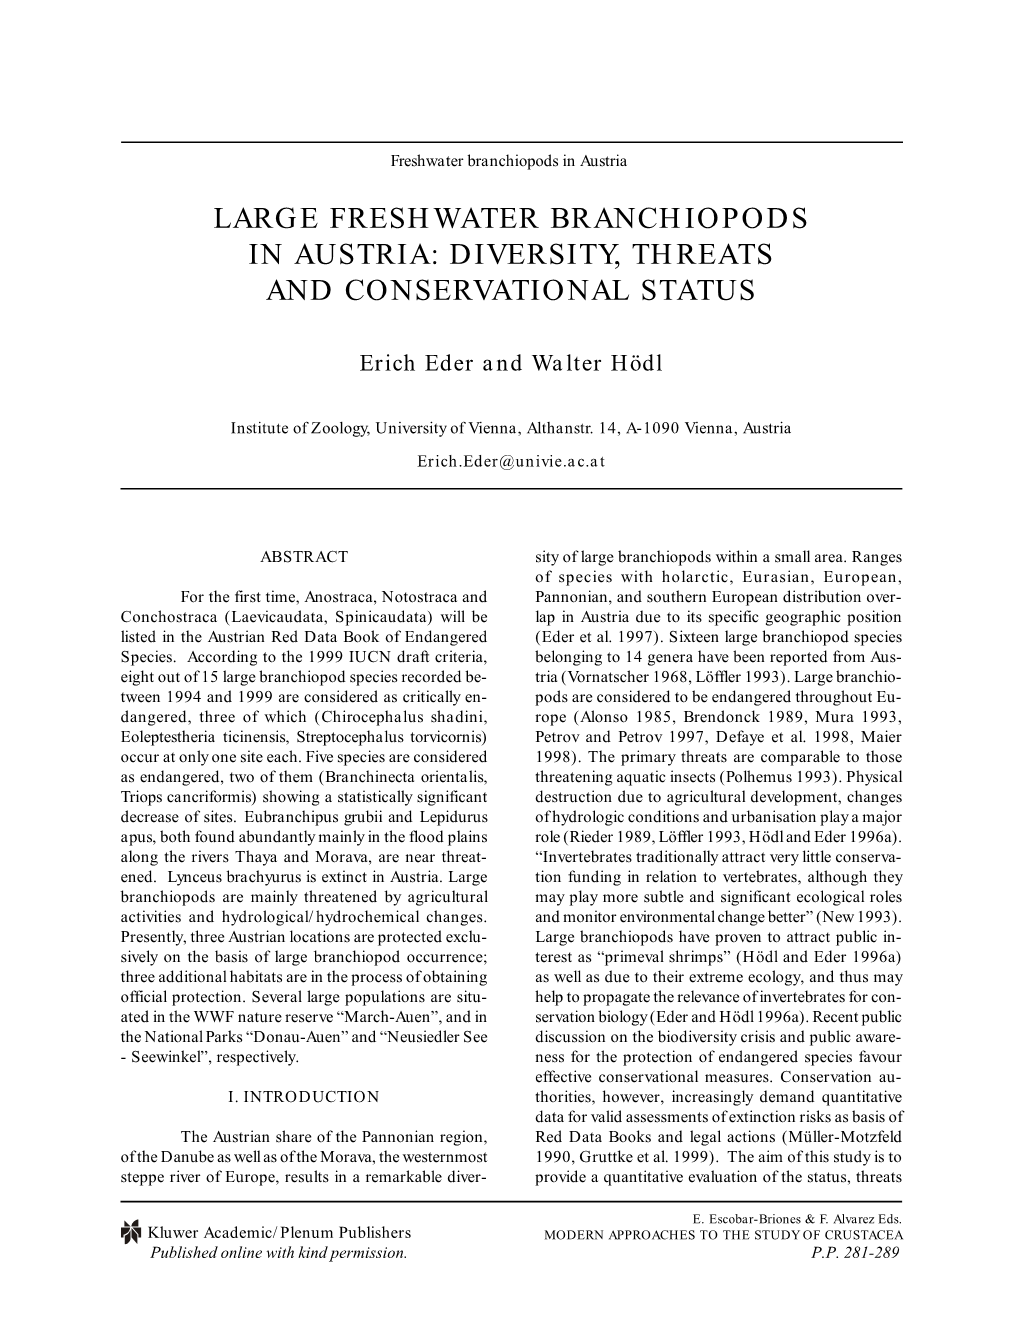 Large Freshwater Branchiopods in Austria: Diversity, Threats, And